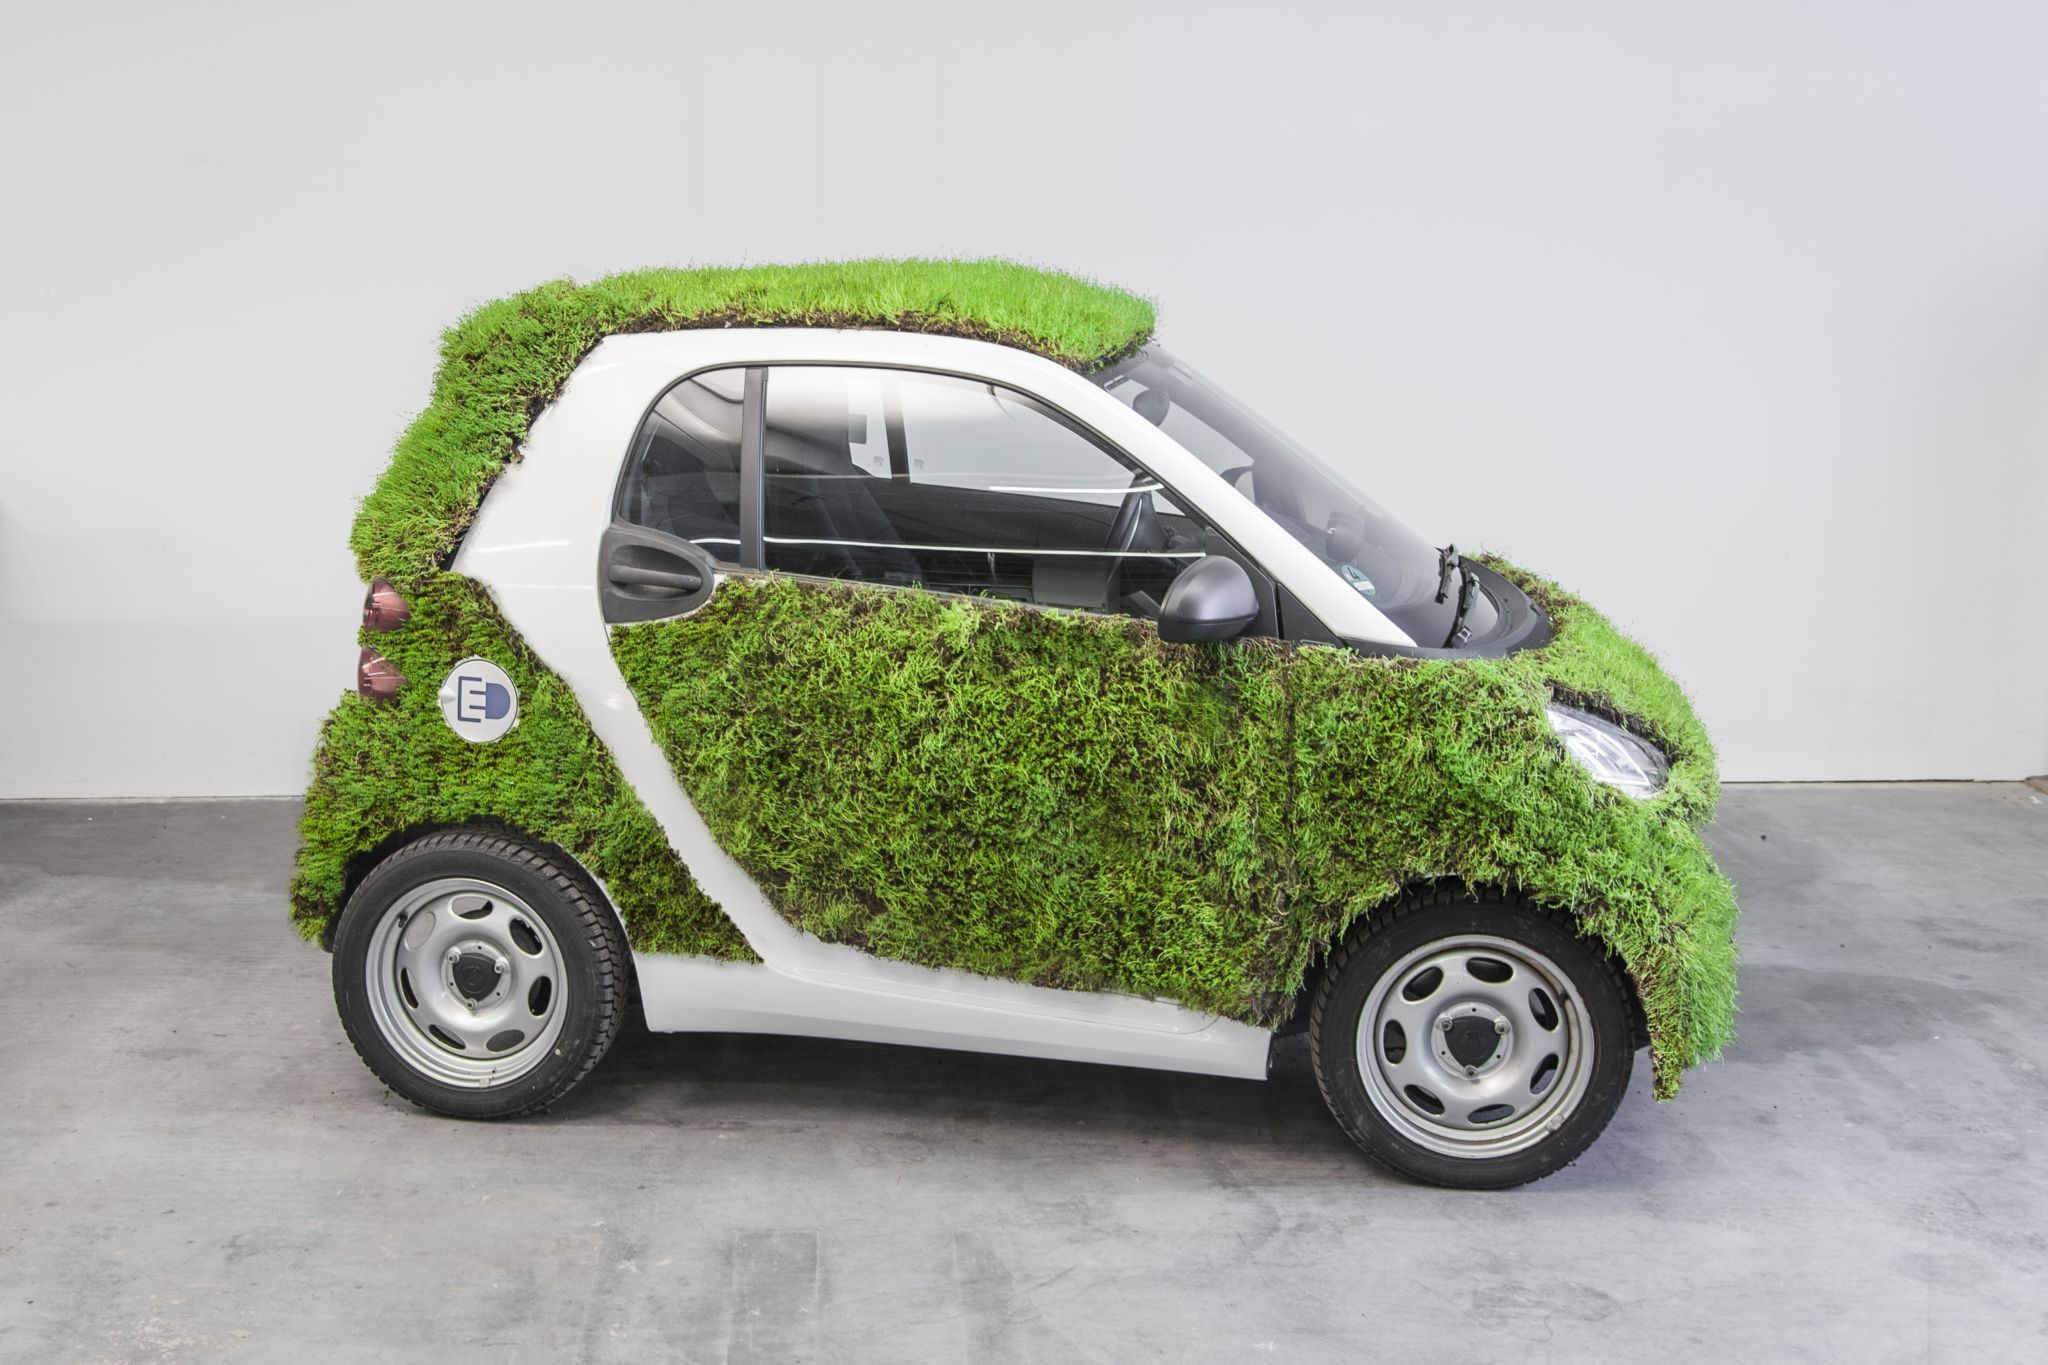 smart-fortwo-takes-the-green-car-thing-a-bit-too-literally_1